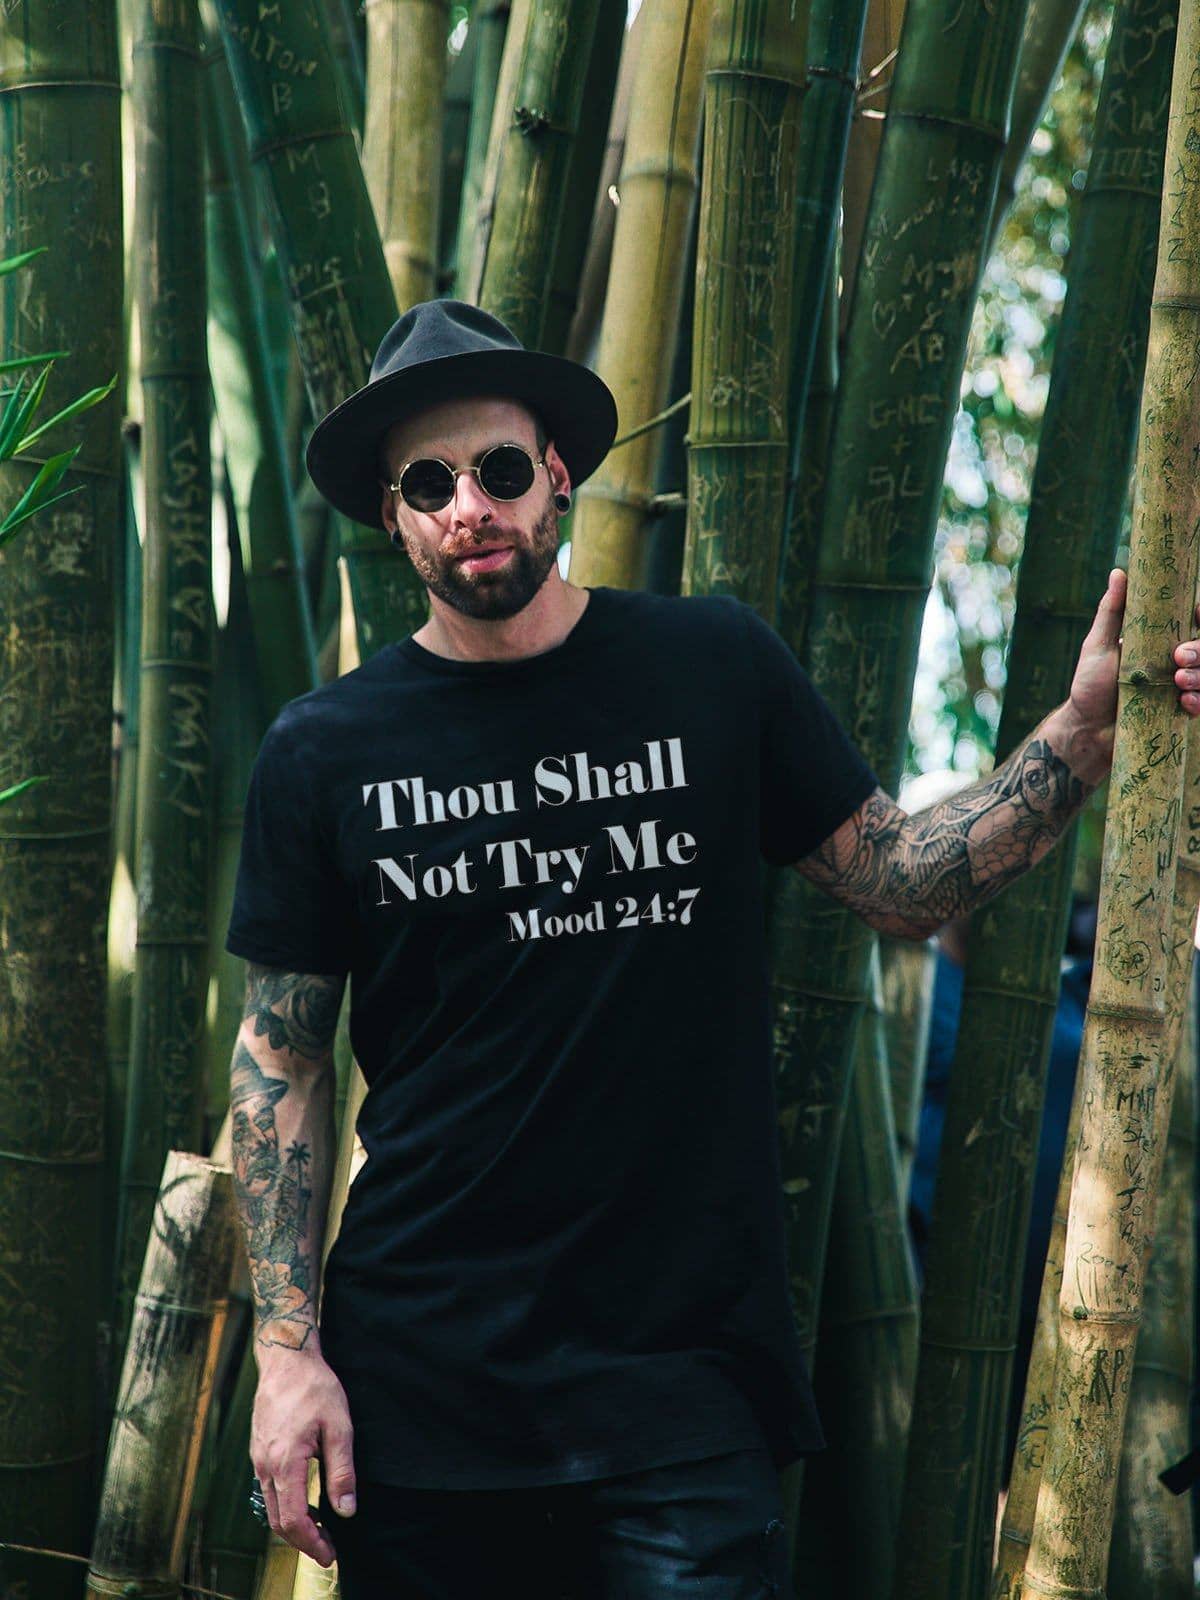 Thou Shall Not Try Me Mood 24 :7 Funny Black T Shirt for Men and Women - Catch My Drift India  black, clothing, female, funny, general, made in india, shirt, t shirt, trending, tshirt